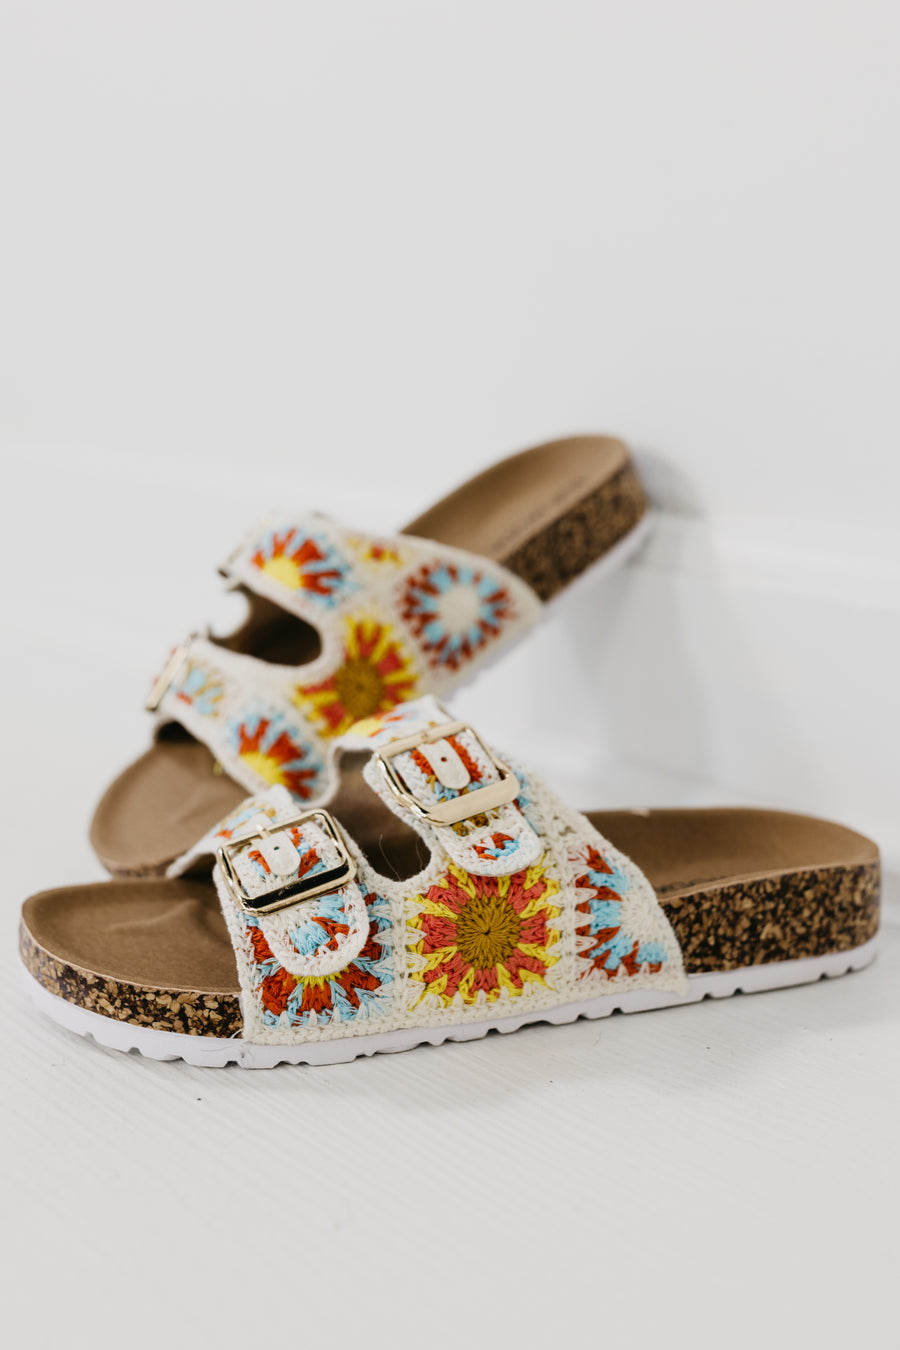 The Mars Embroidered Sandal